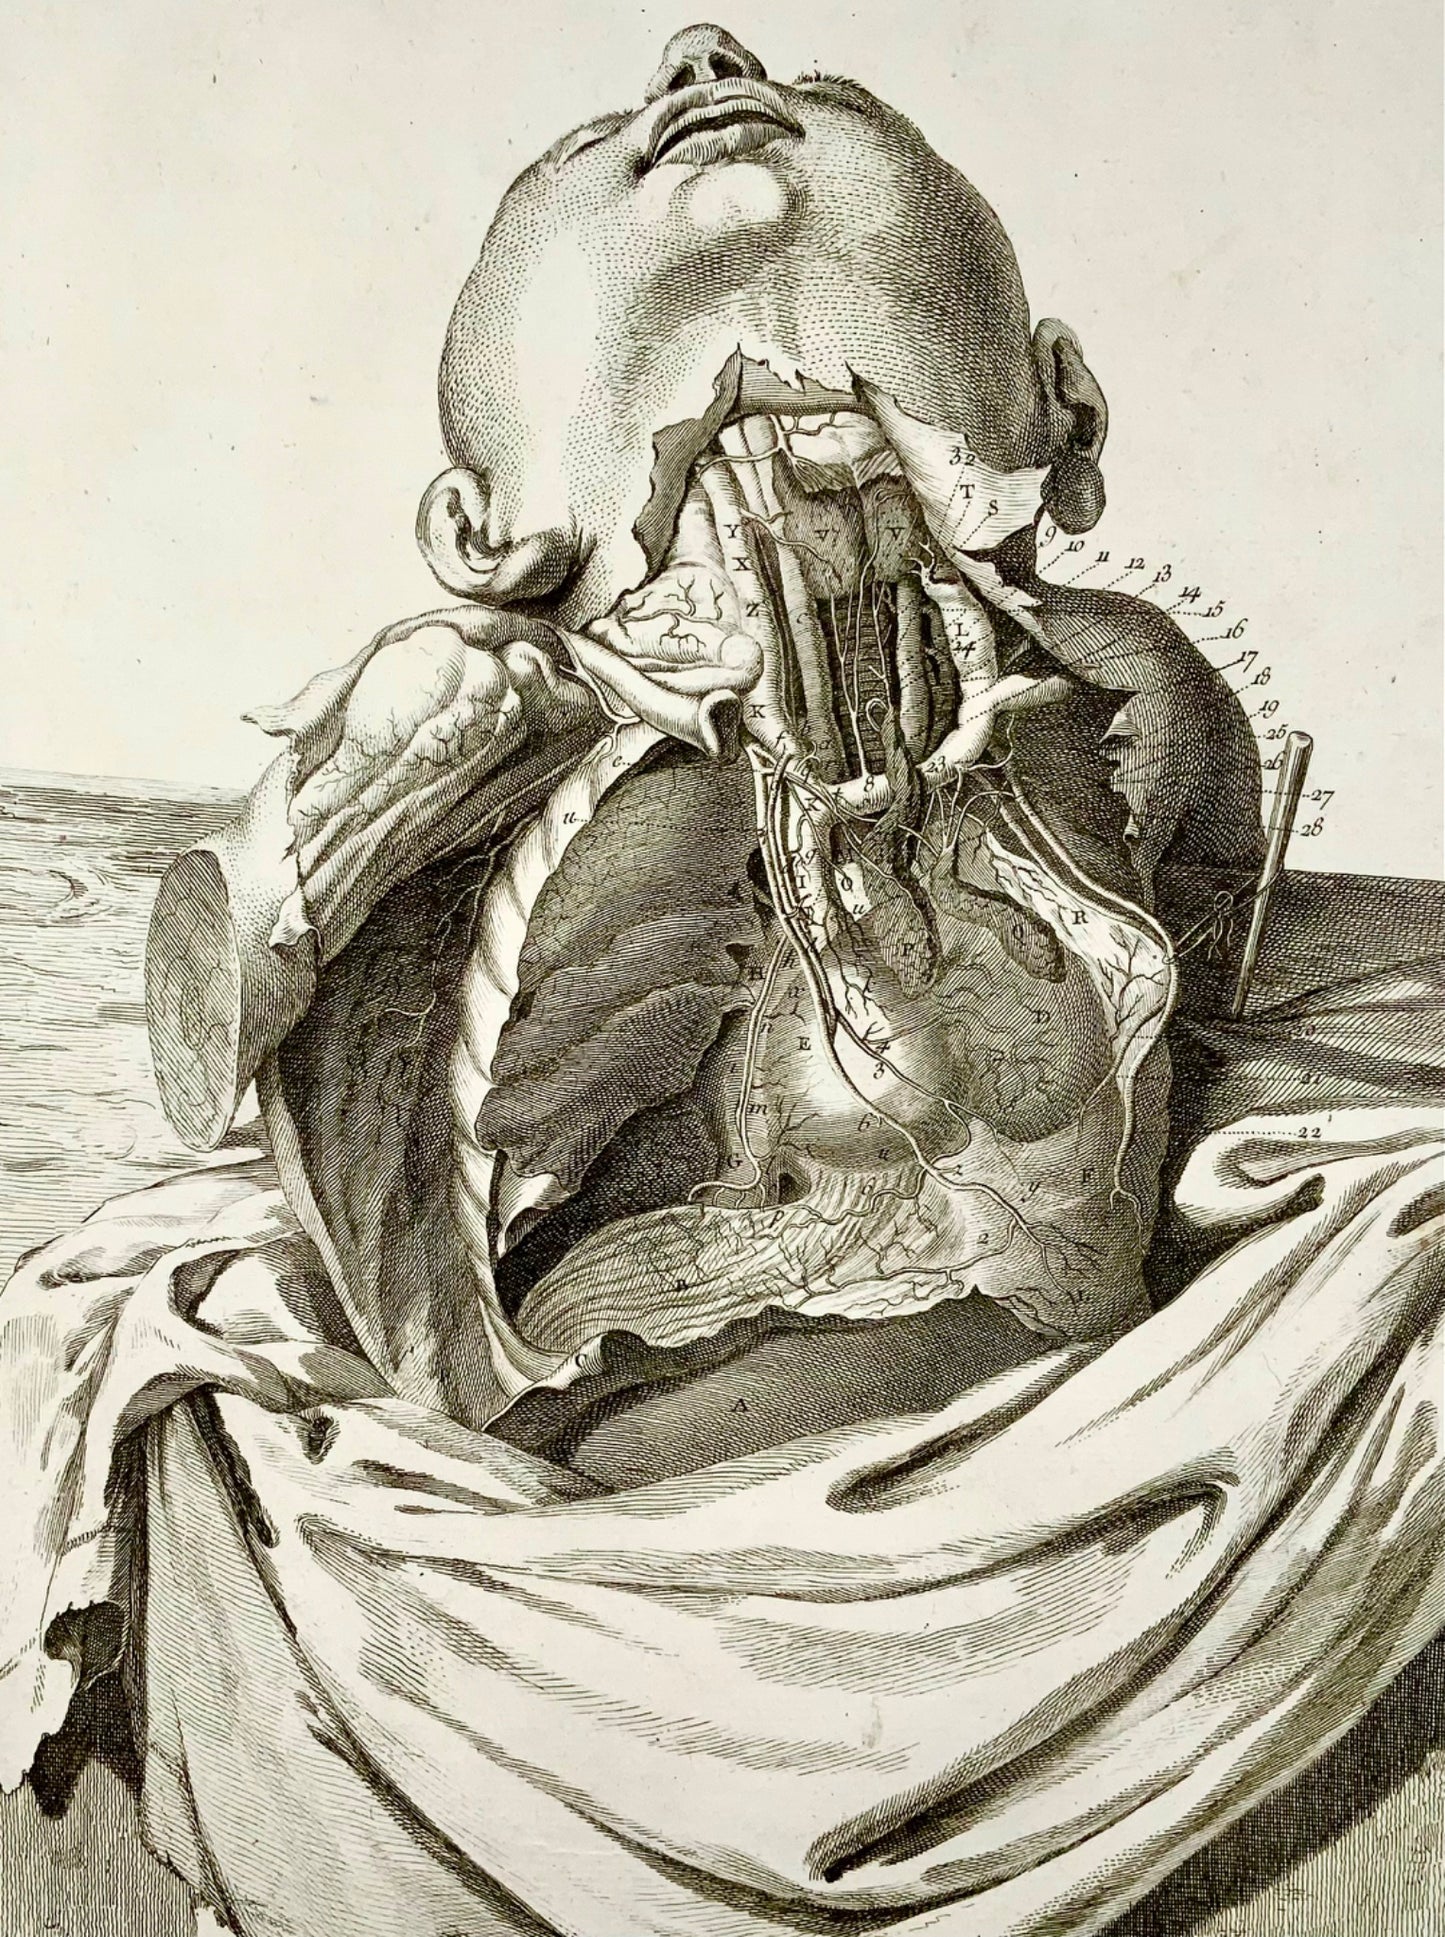 1777 Anatomy, after Haller, arteries of the thorax, tall folio